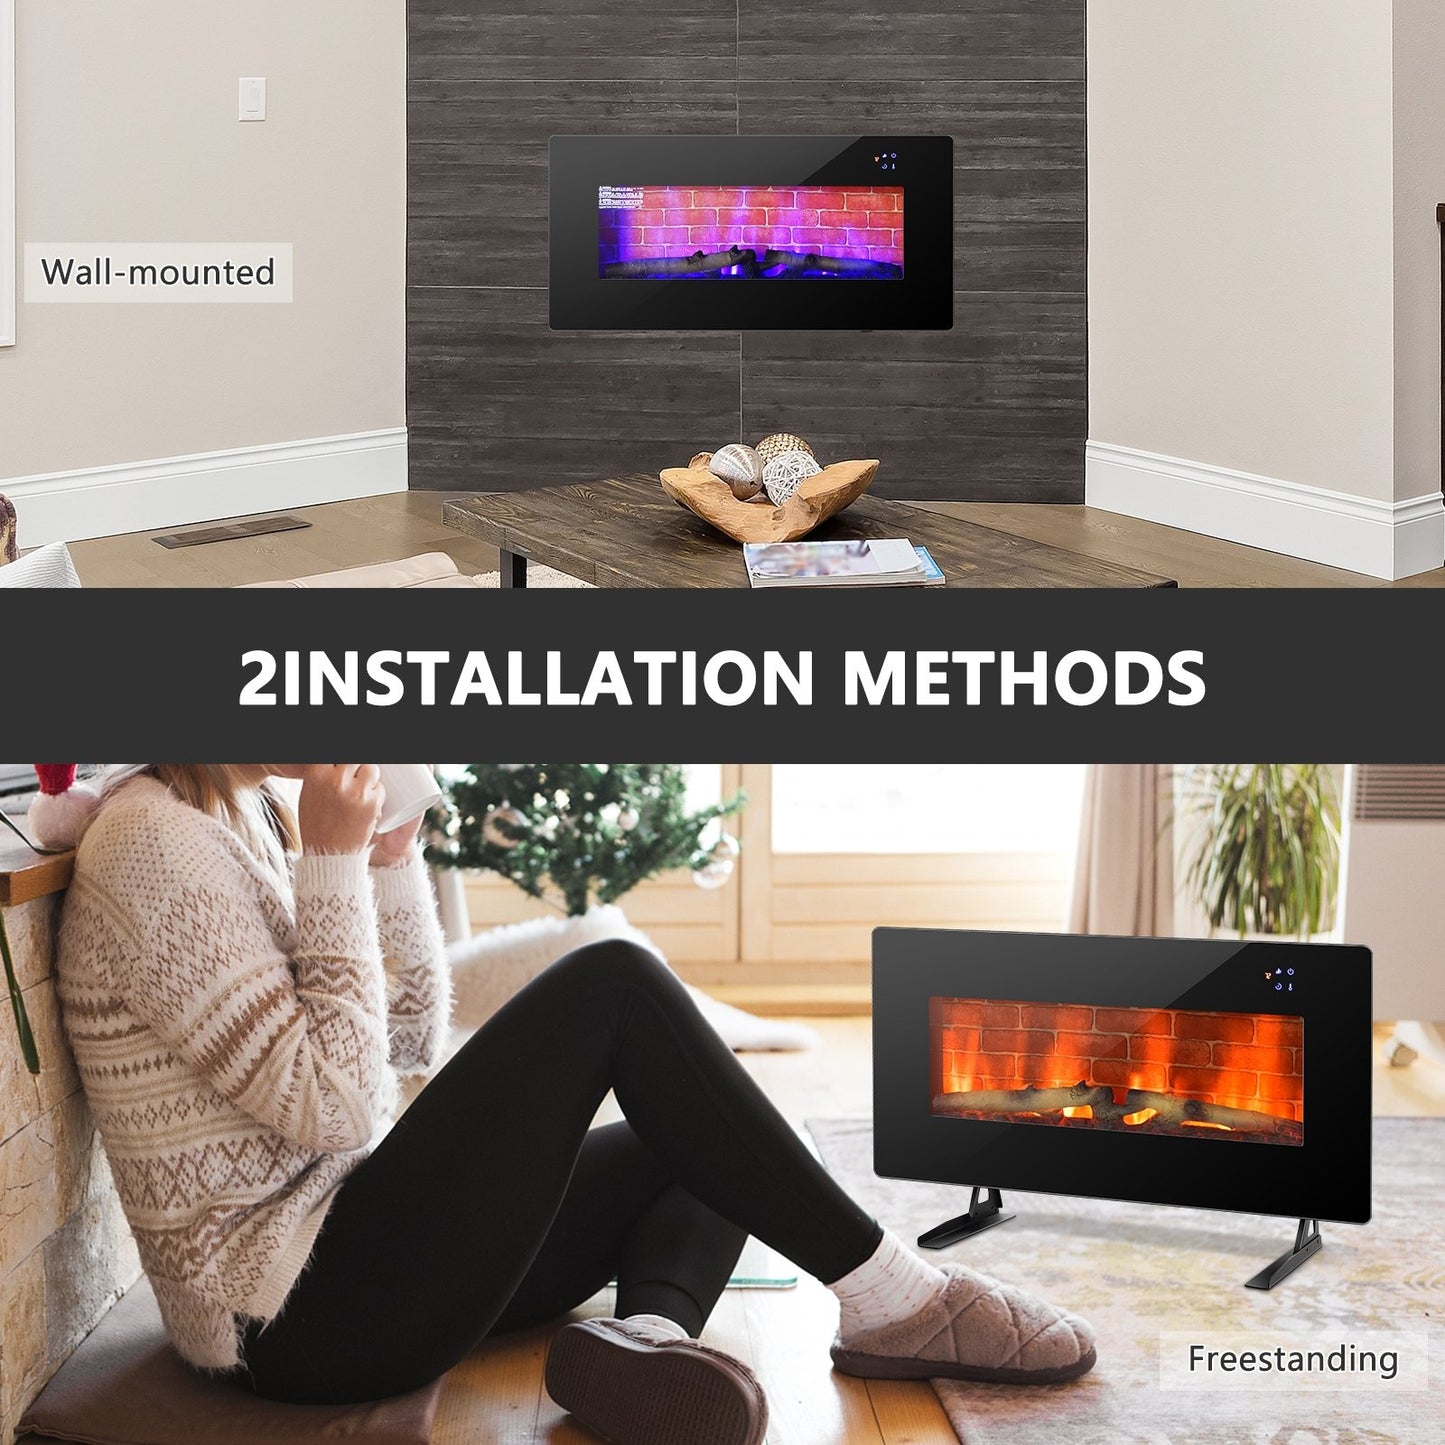 36 Inch Electric Wall Mounted Freestanding Fireplace with Remote Control, Black - Gallery Canada